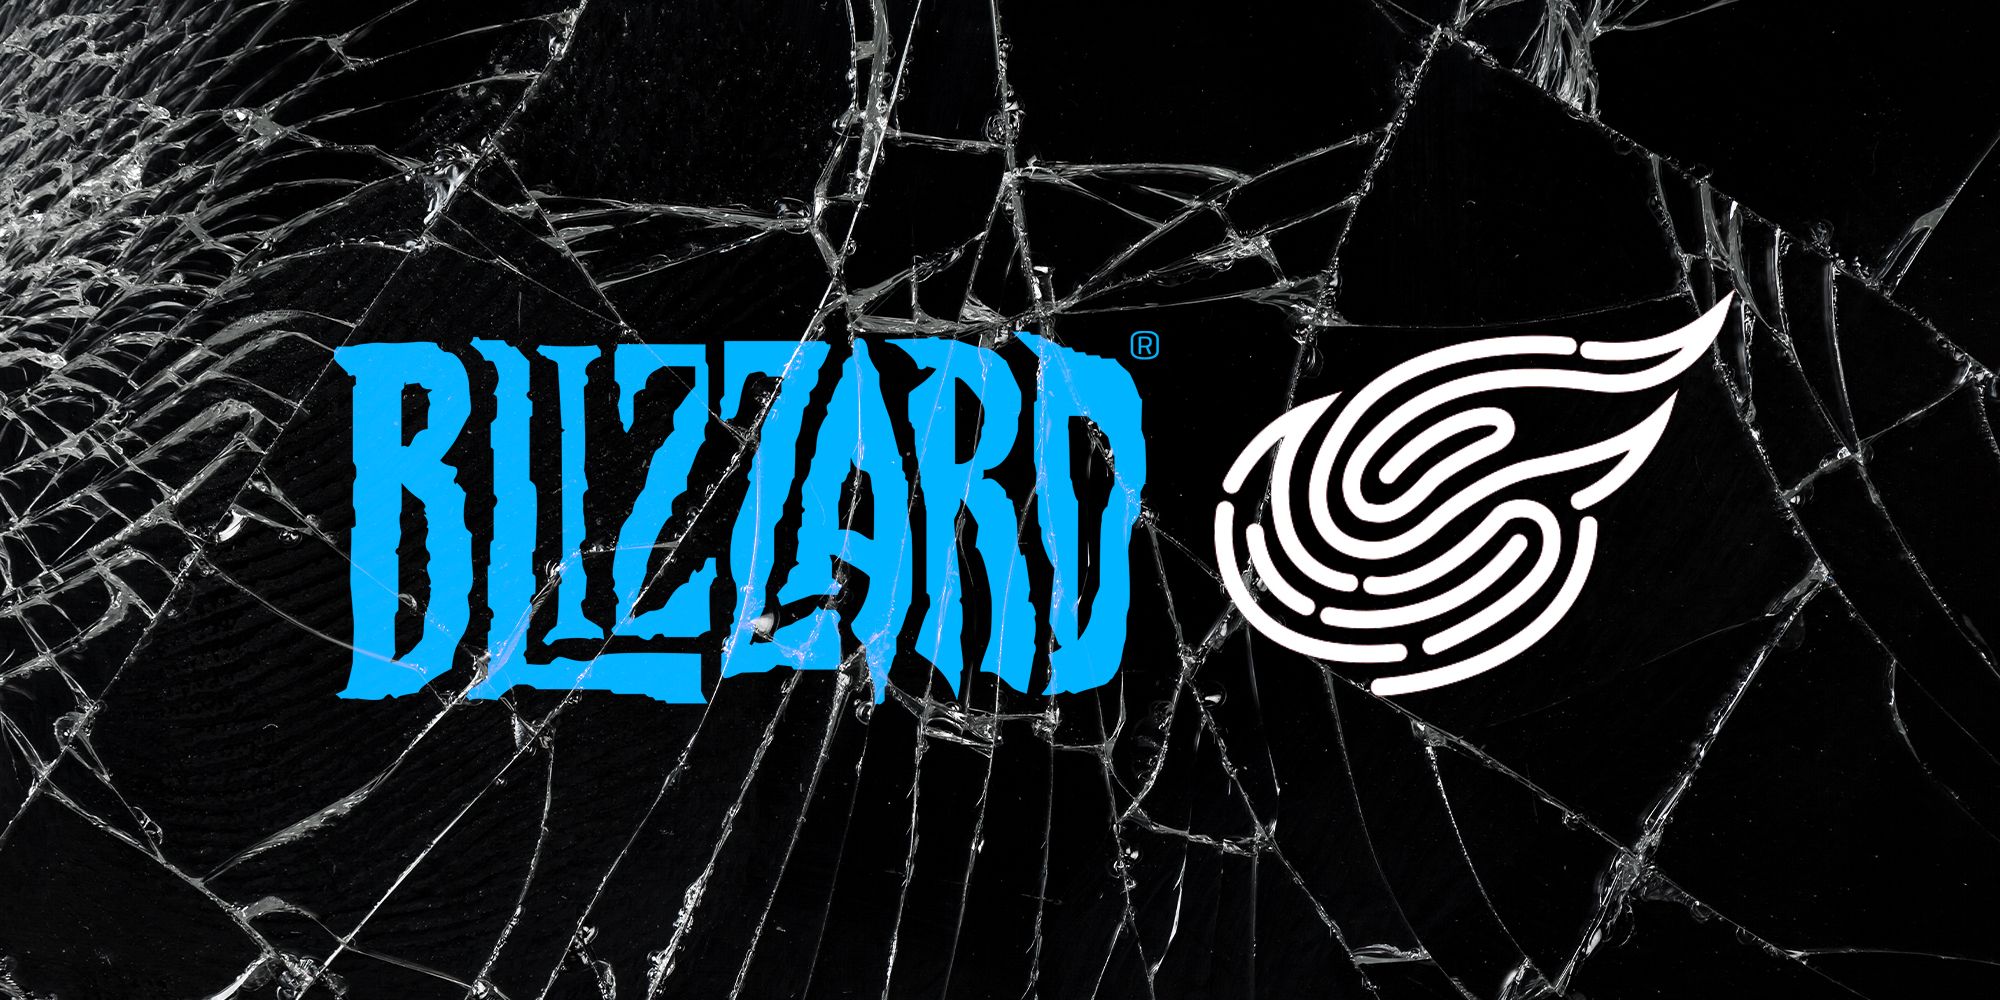 Blizzard and NetEase logos underneath cracked glass